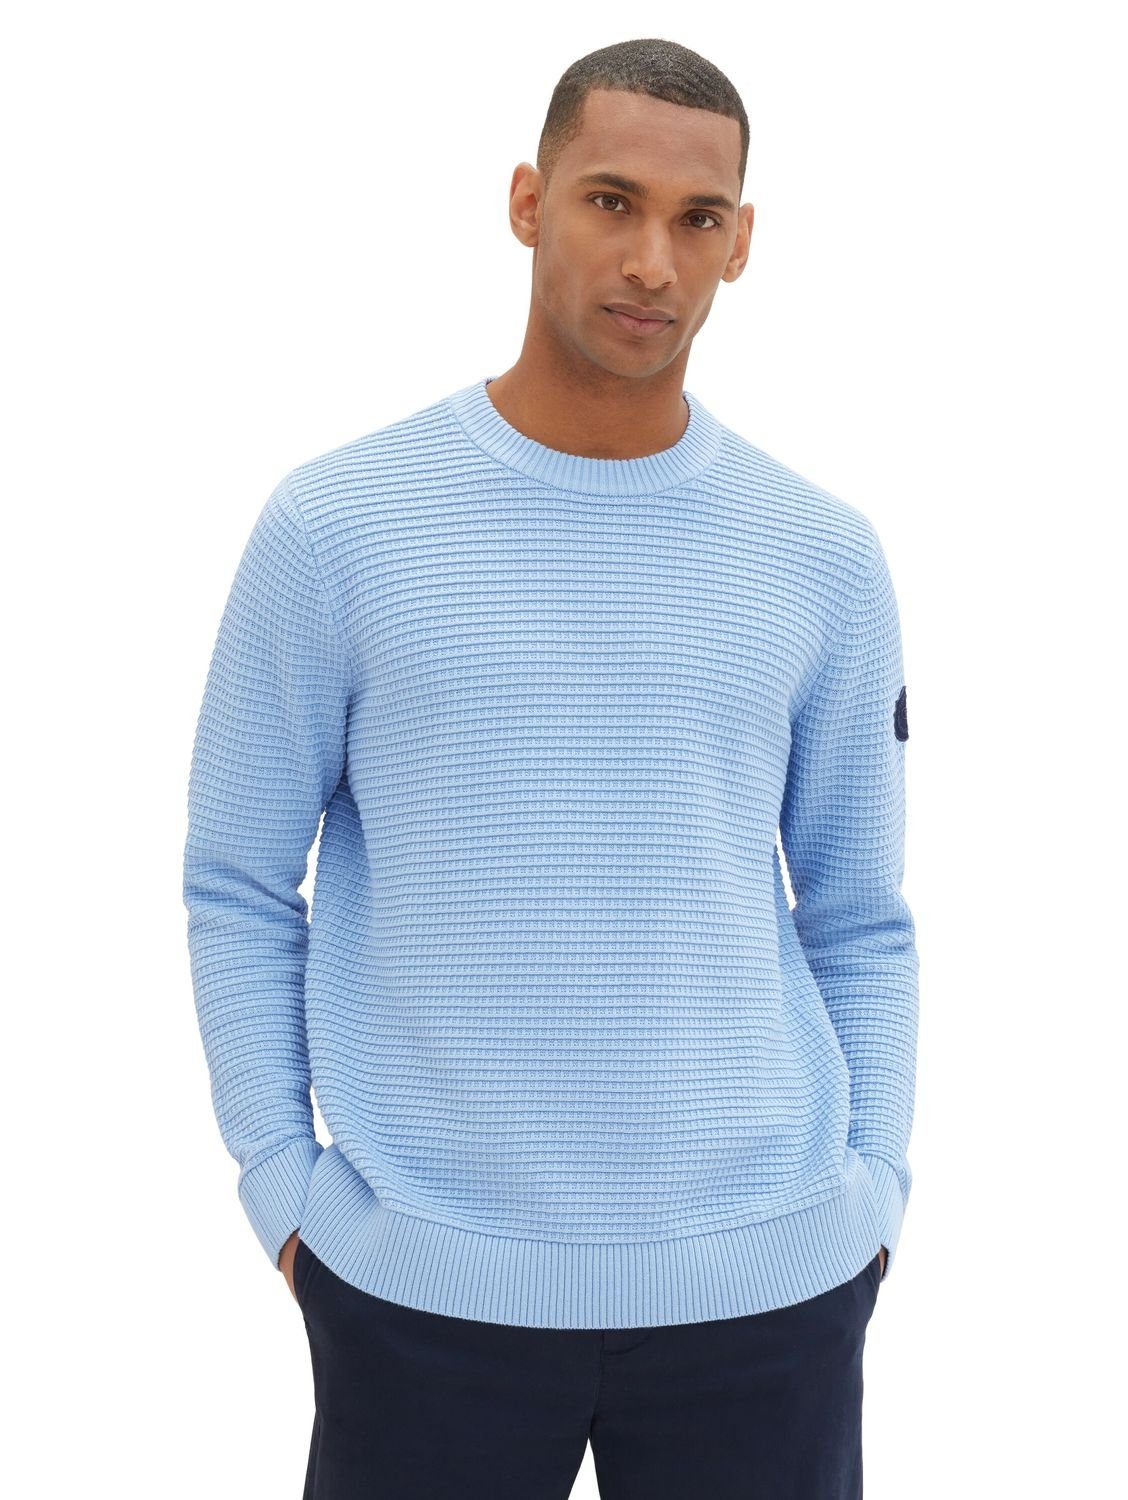 TOM TAILOR Strickpullover STRUCTURED CREWNECK KNIT aus Baumwolle Washed Out Middle Blue 32245